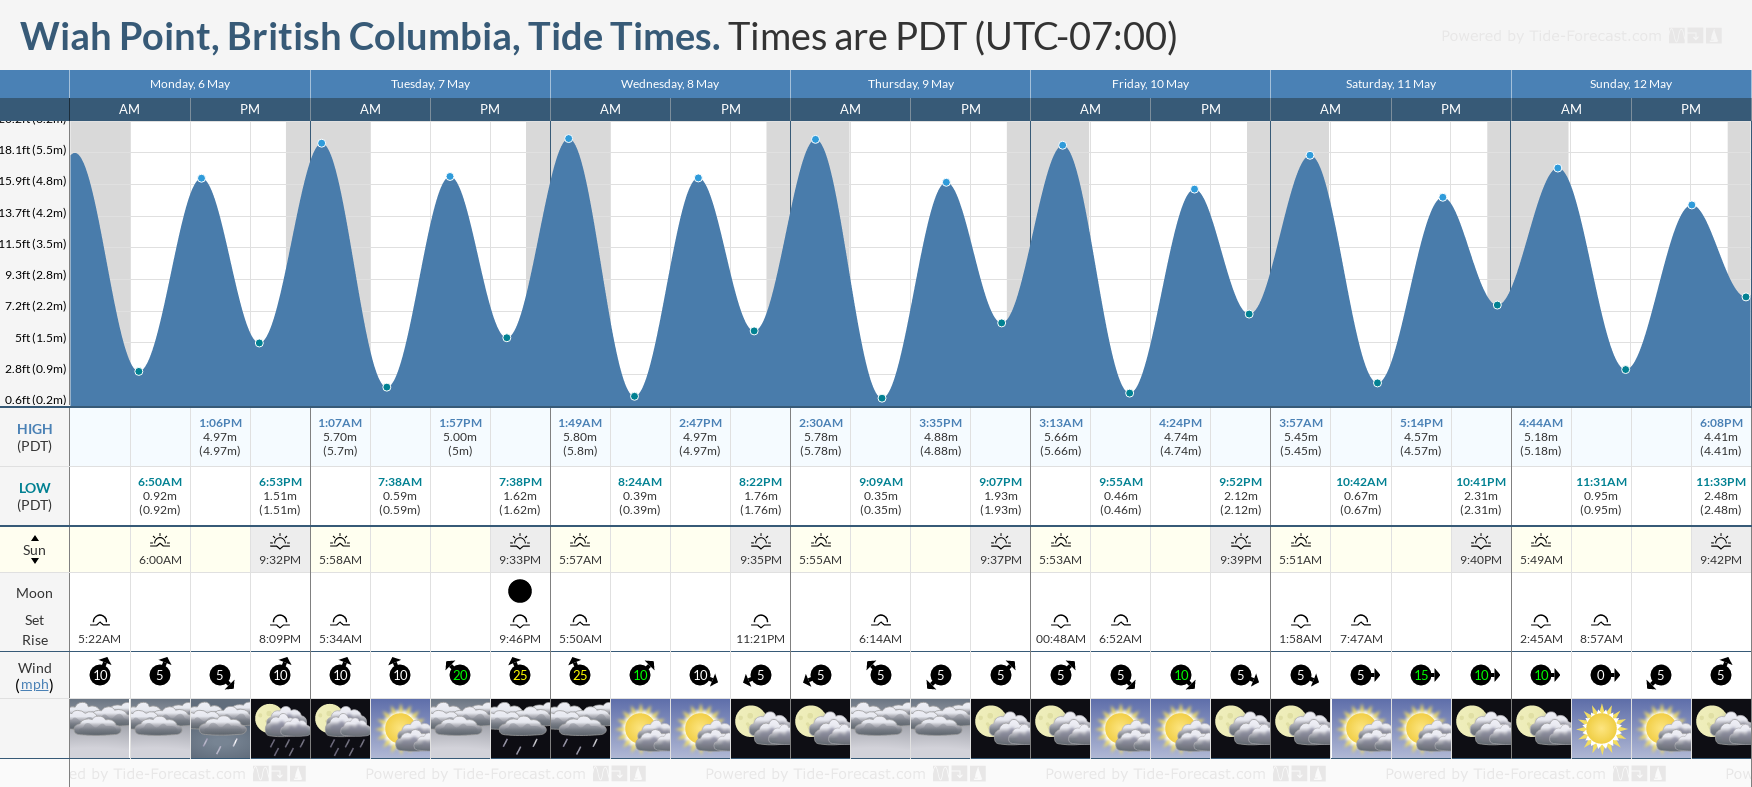 Wiah Point, British Columbia Tide Chart including high and low tide times for the next 7 days